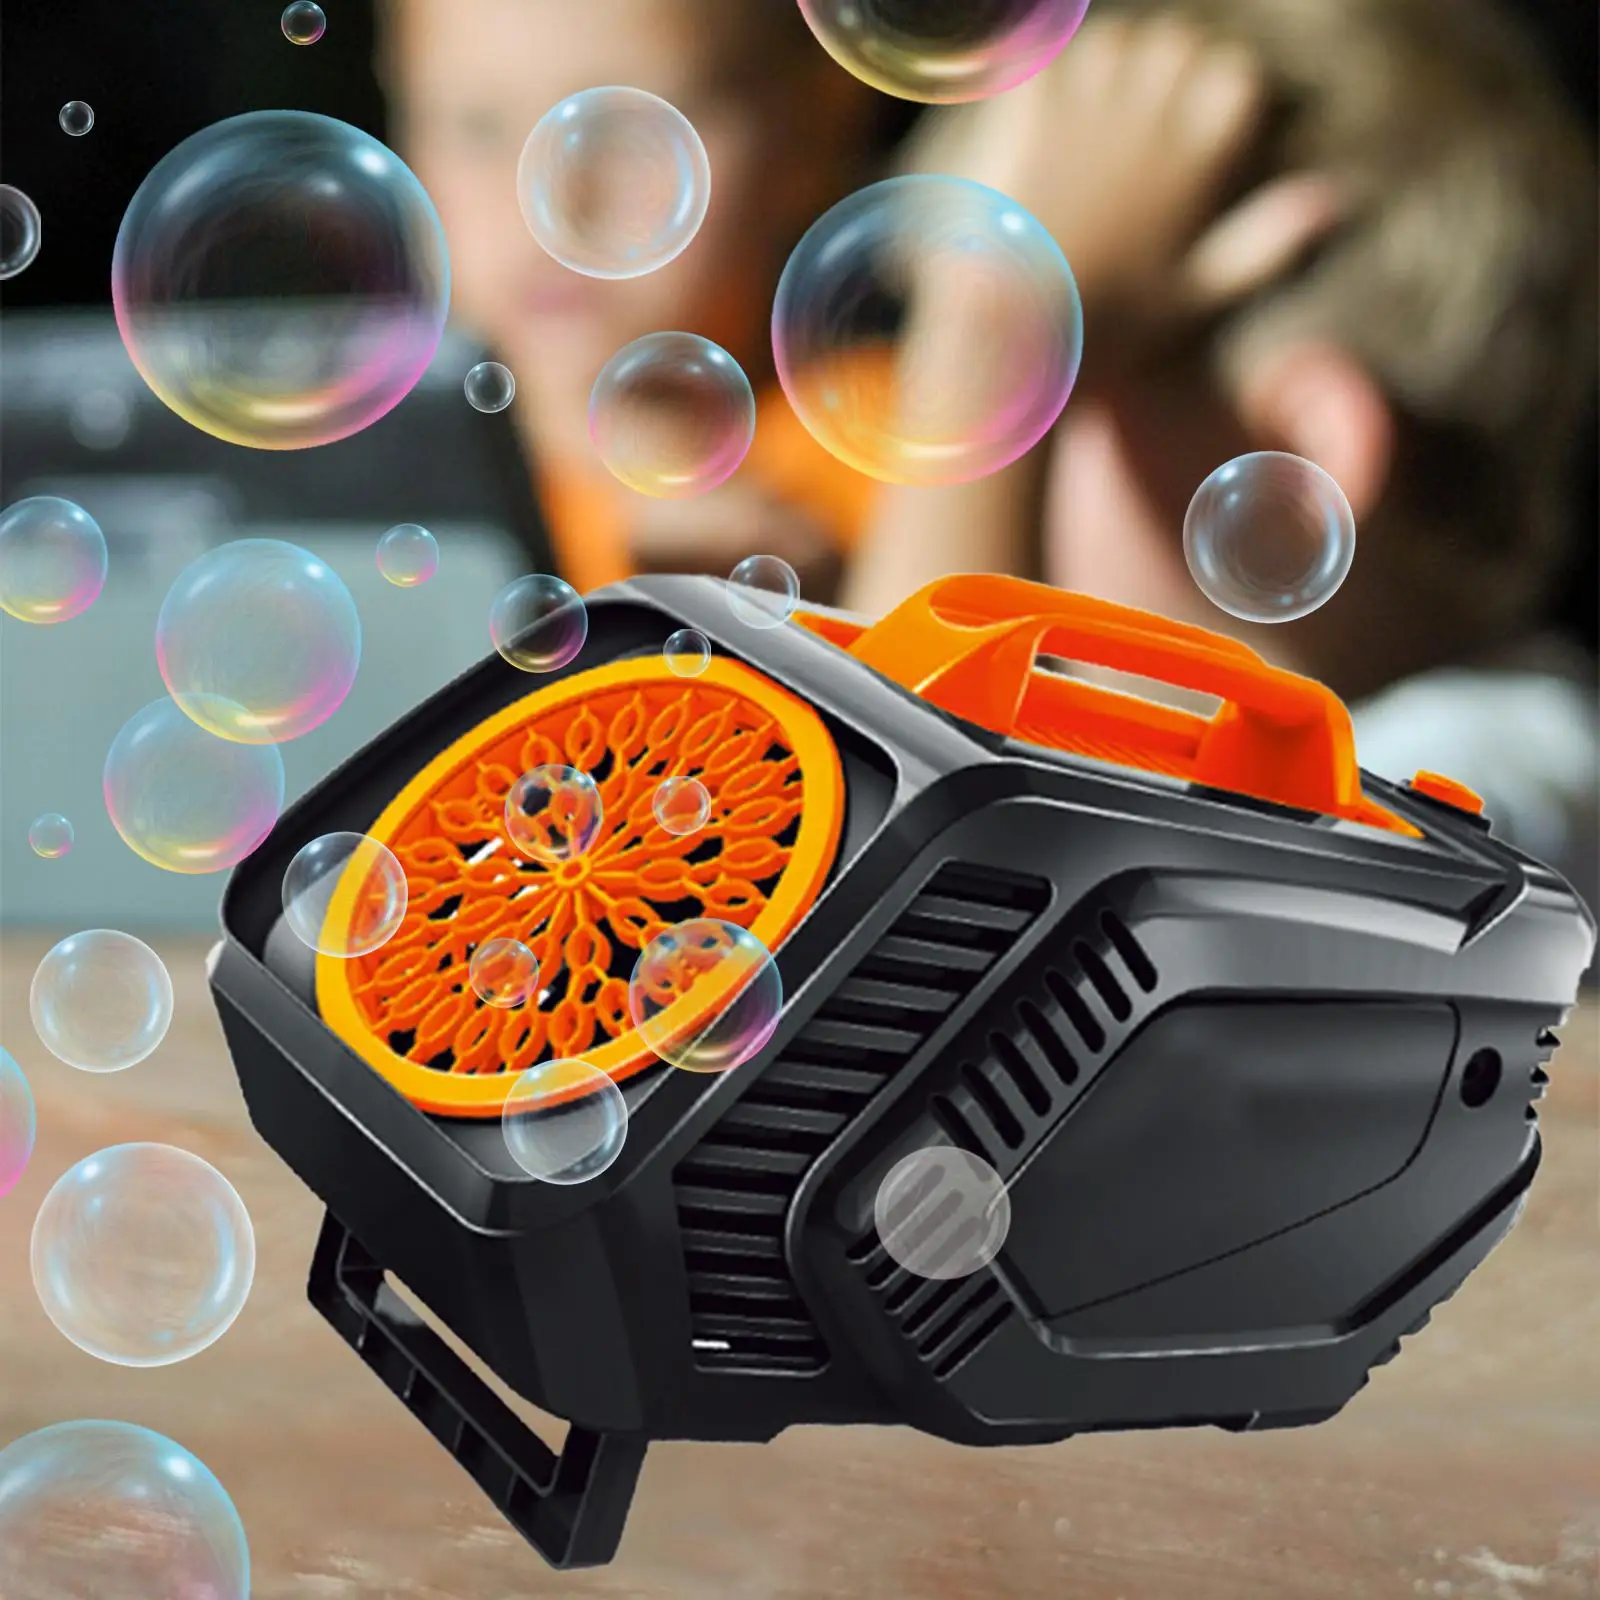 Automatic Bubble Maker Bubble Making Toy with Flashing Lights Bubble Blower for Outdoor Christmas Party Favors Wedding